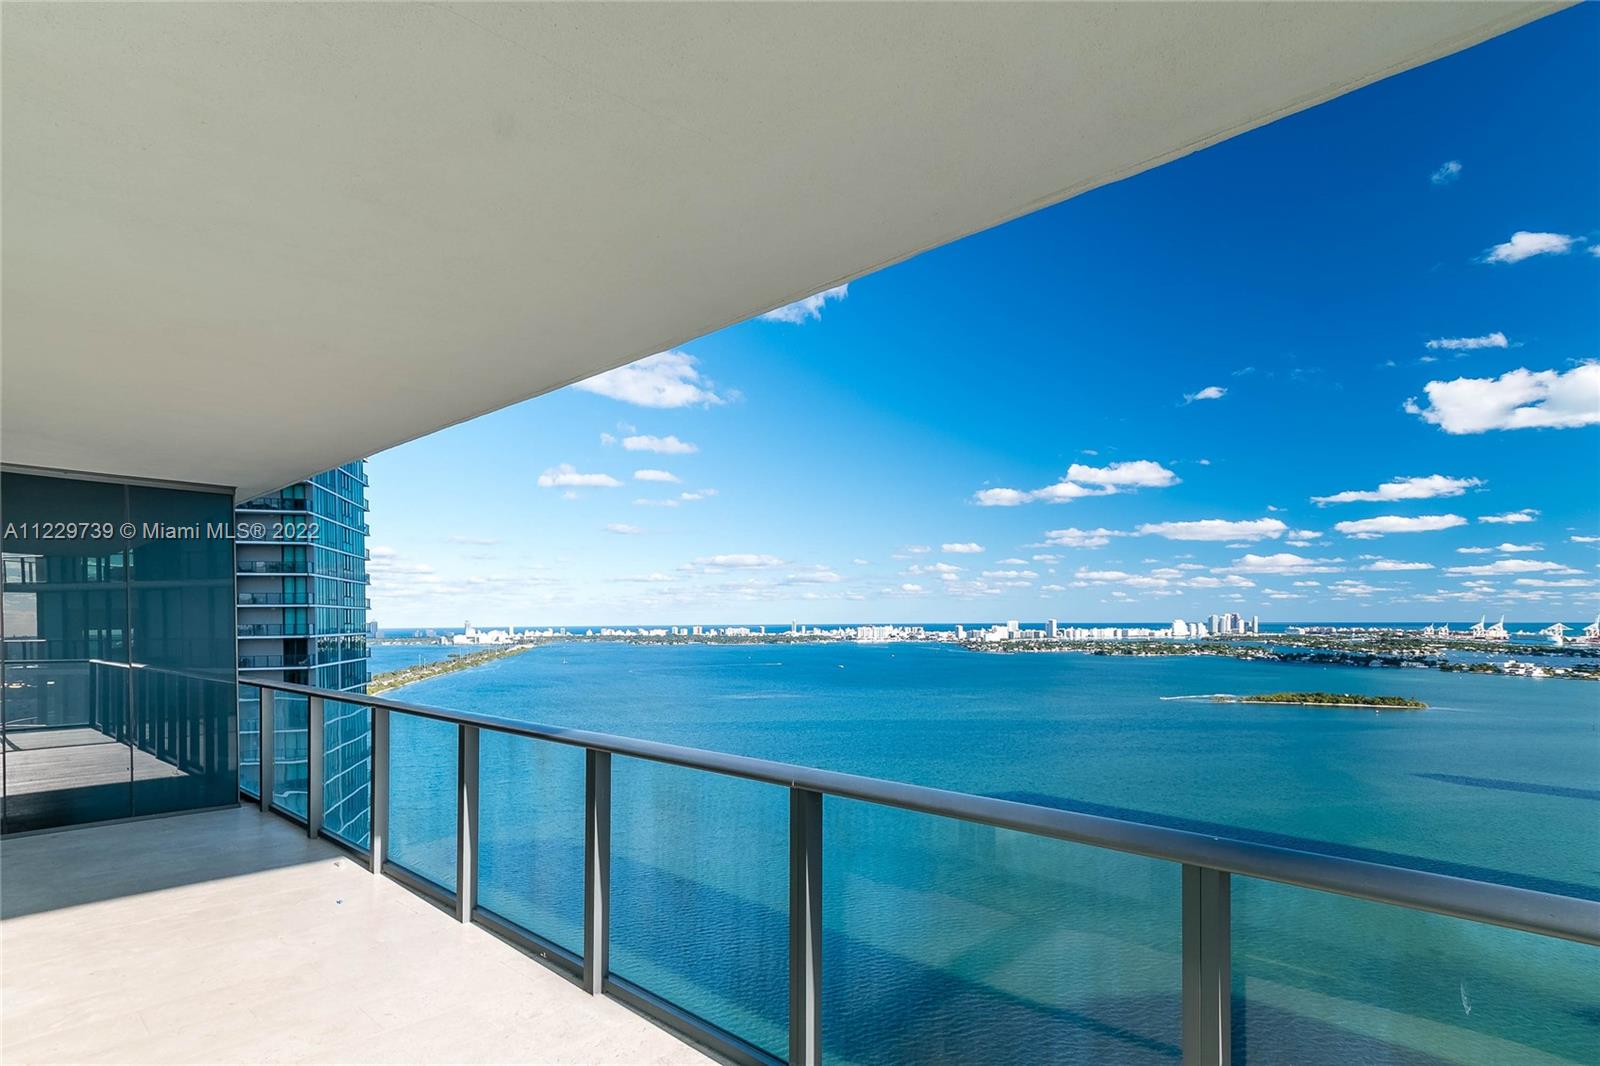 Welcome to your luxury waterfront home in Edgewater, Miami. The living at Paraiso Bay is scenic, serene and convenient. With 3 en-suite bedrooms & 3.5 bathrooms spread across 1,646 sqft, this gorgeous corner residence features floor to ceiling windows throughout so you can enjoy direct & unobstructed water views of the Biscayne Bay, the sunset & city lights! Come home through your private elevator & foyer entrance into your open kitchen and living room space, the perfect place to entertain. The kitchen is equipped with an island, Italian cabinetry and Bosch & Sub Zero kitchen appliances. Other features of this flow-through unit are 9 ft ceilings, oversized private balconies where you can do some yoga or entertain, window treatments, and custom closet cabinetry.